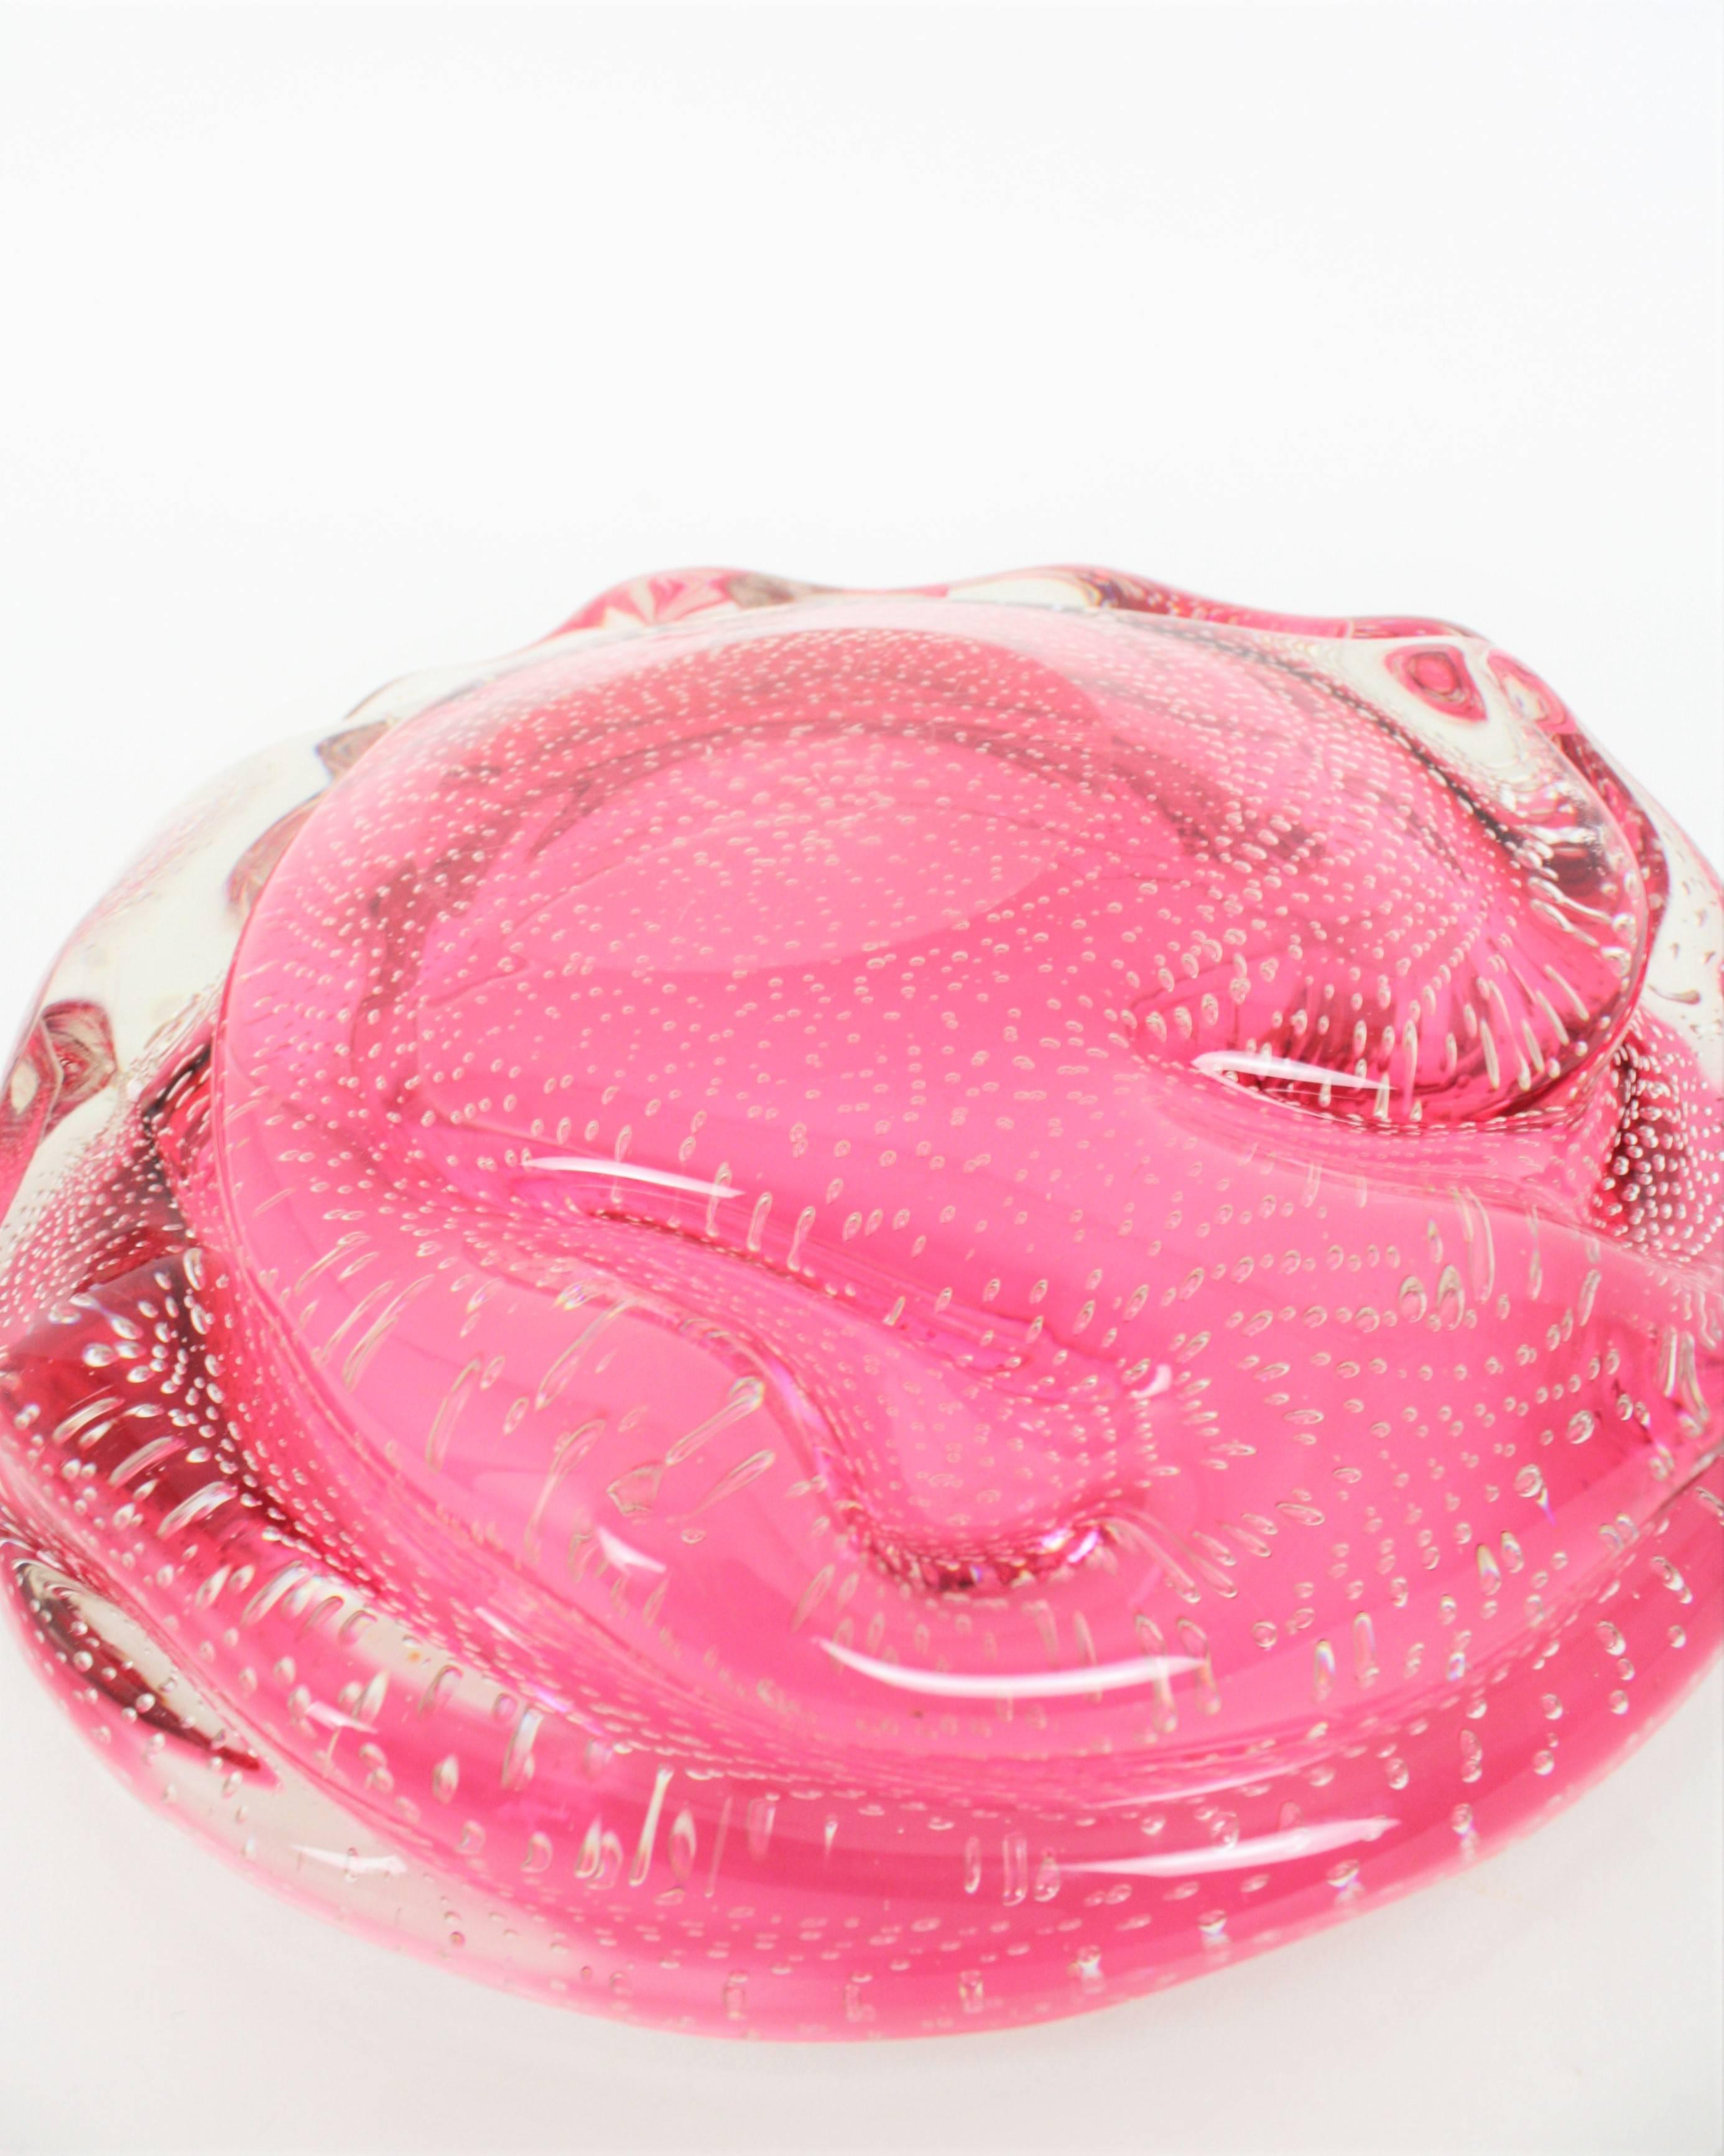 Archimede Seguso Pink Controlled Bubbles Murano Glass Centrepiece / Large Bowl 3